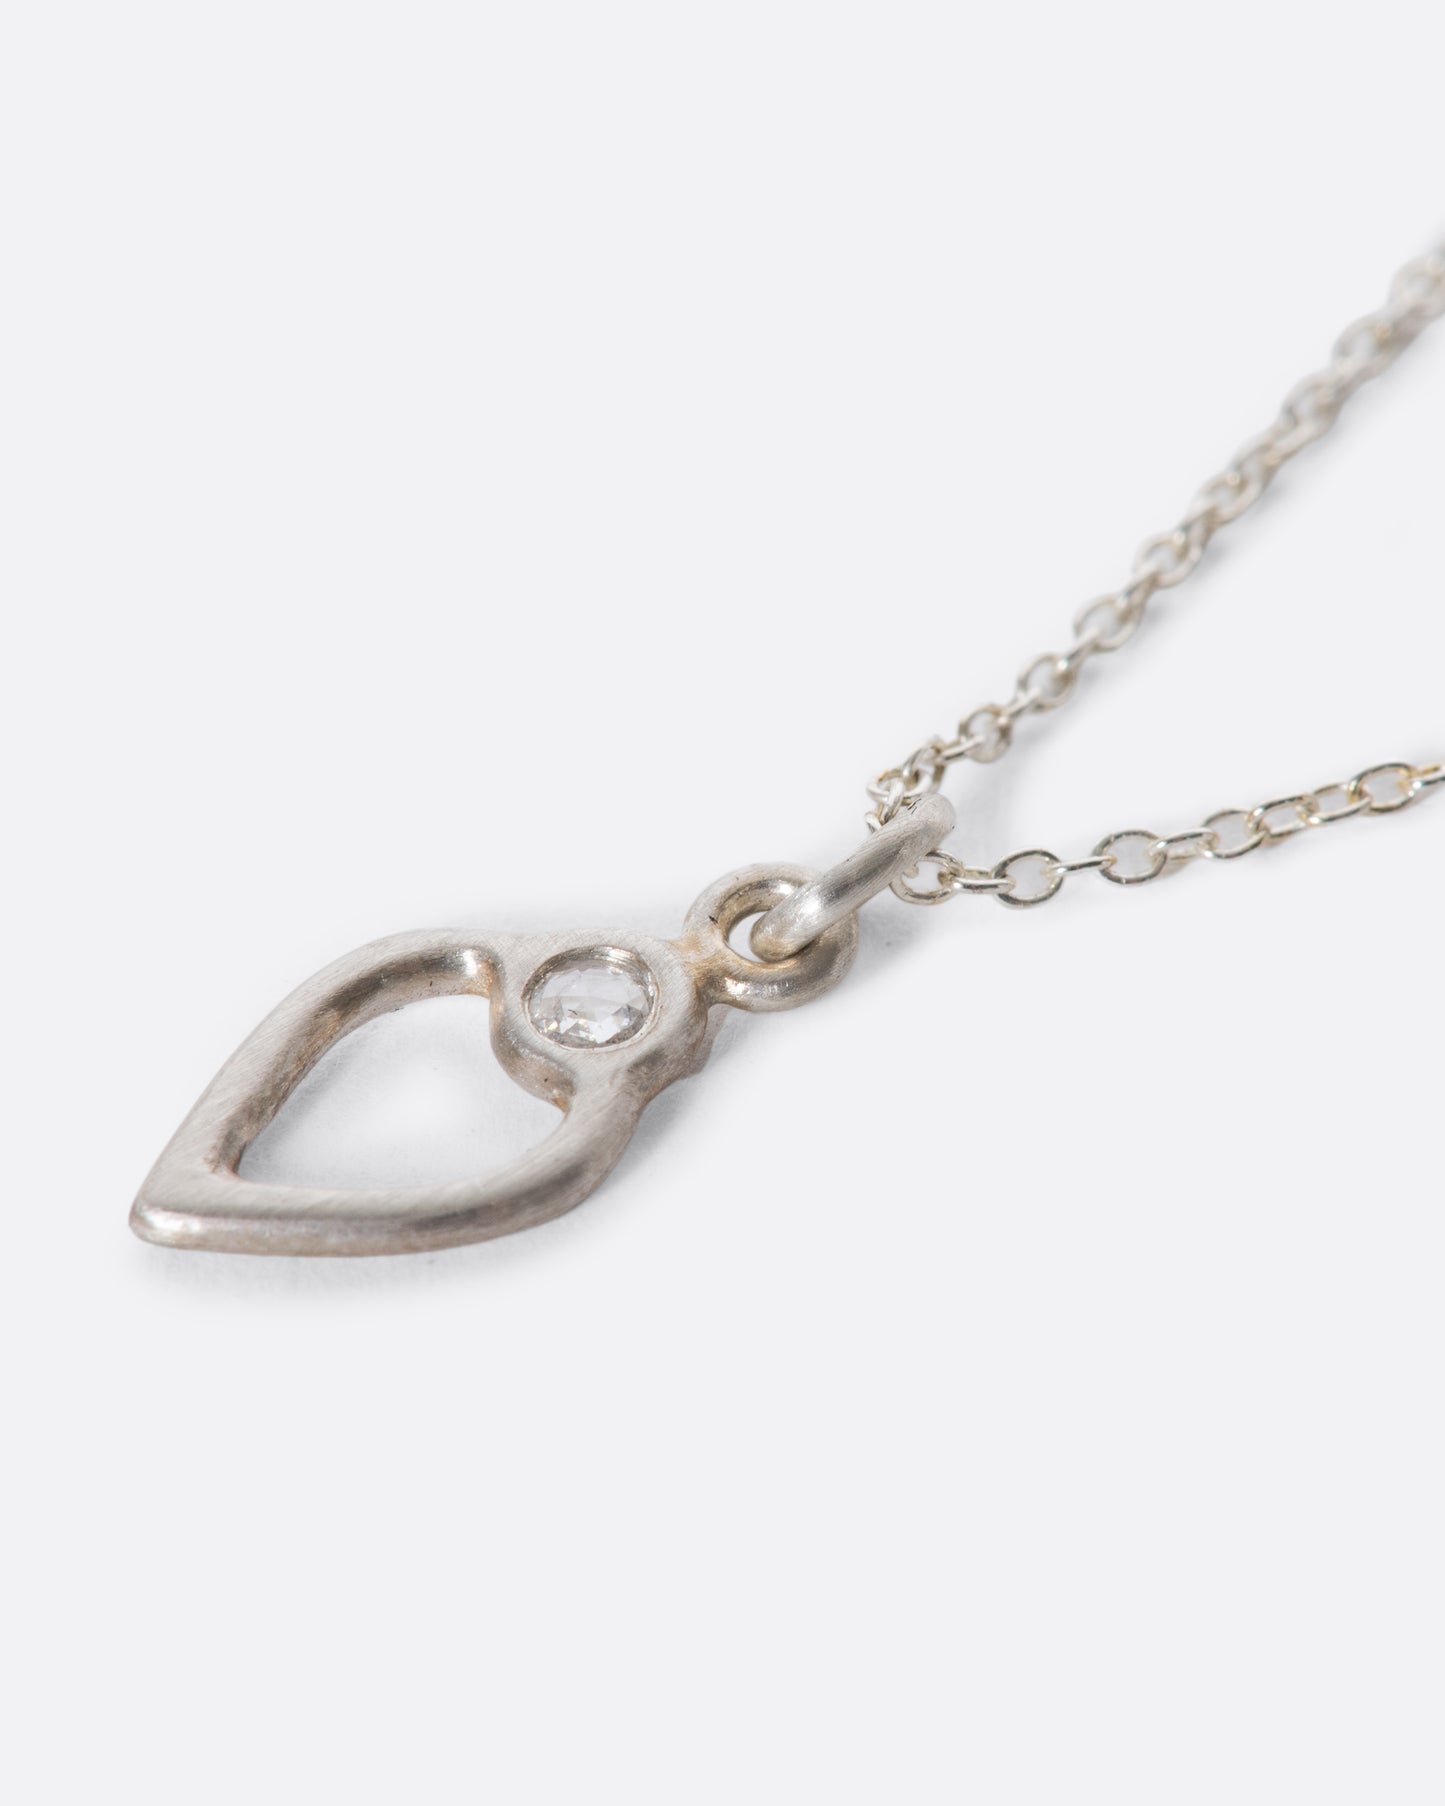 A delicate heart pendant necklace with a rose-cut diamond detail. The perfect piece if you're looking for something simple and unique to wear daily.